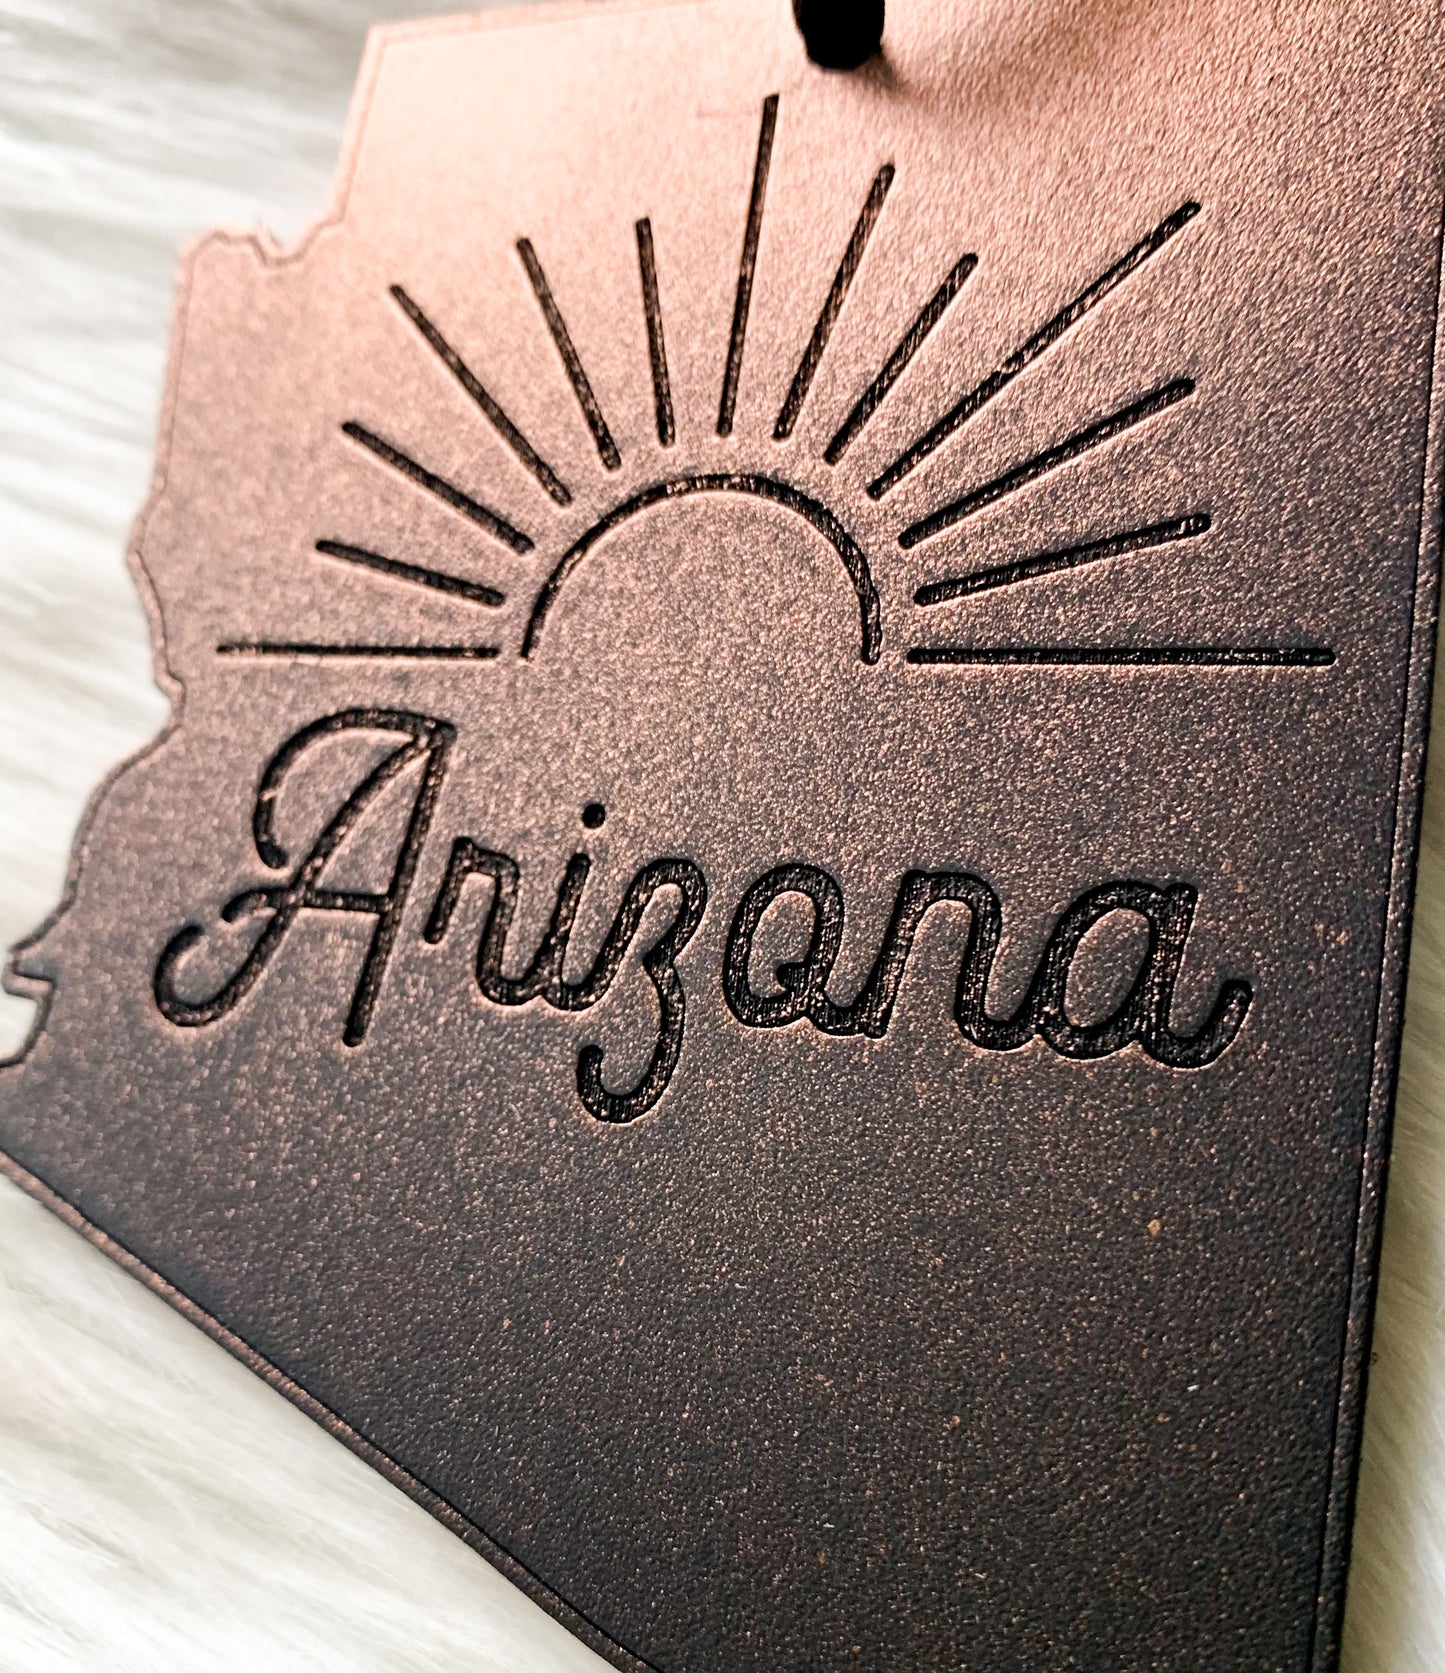 Black and Copper Painted Arizona Ornament